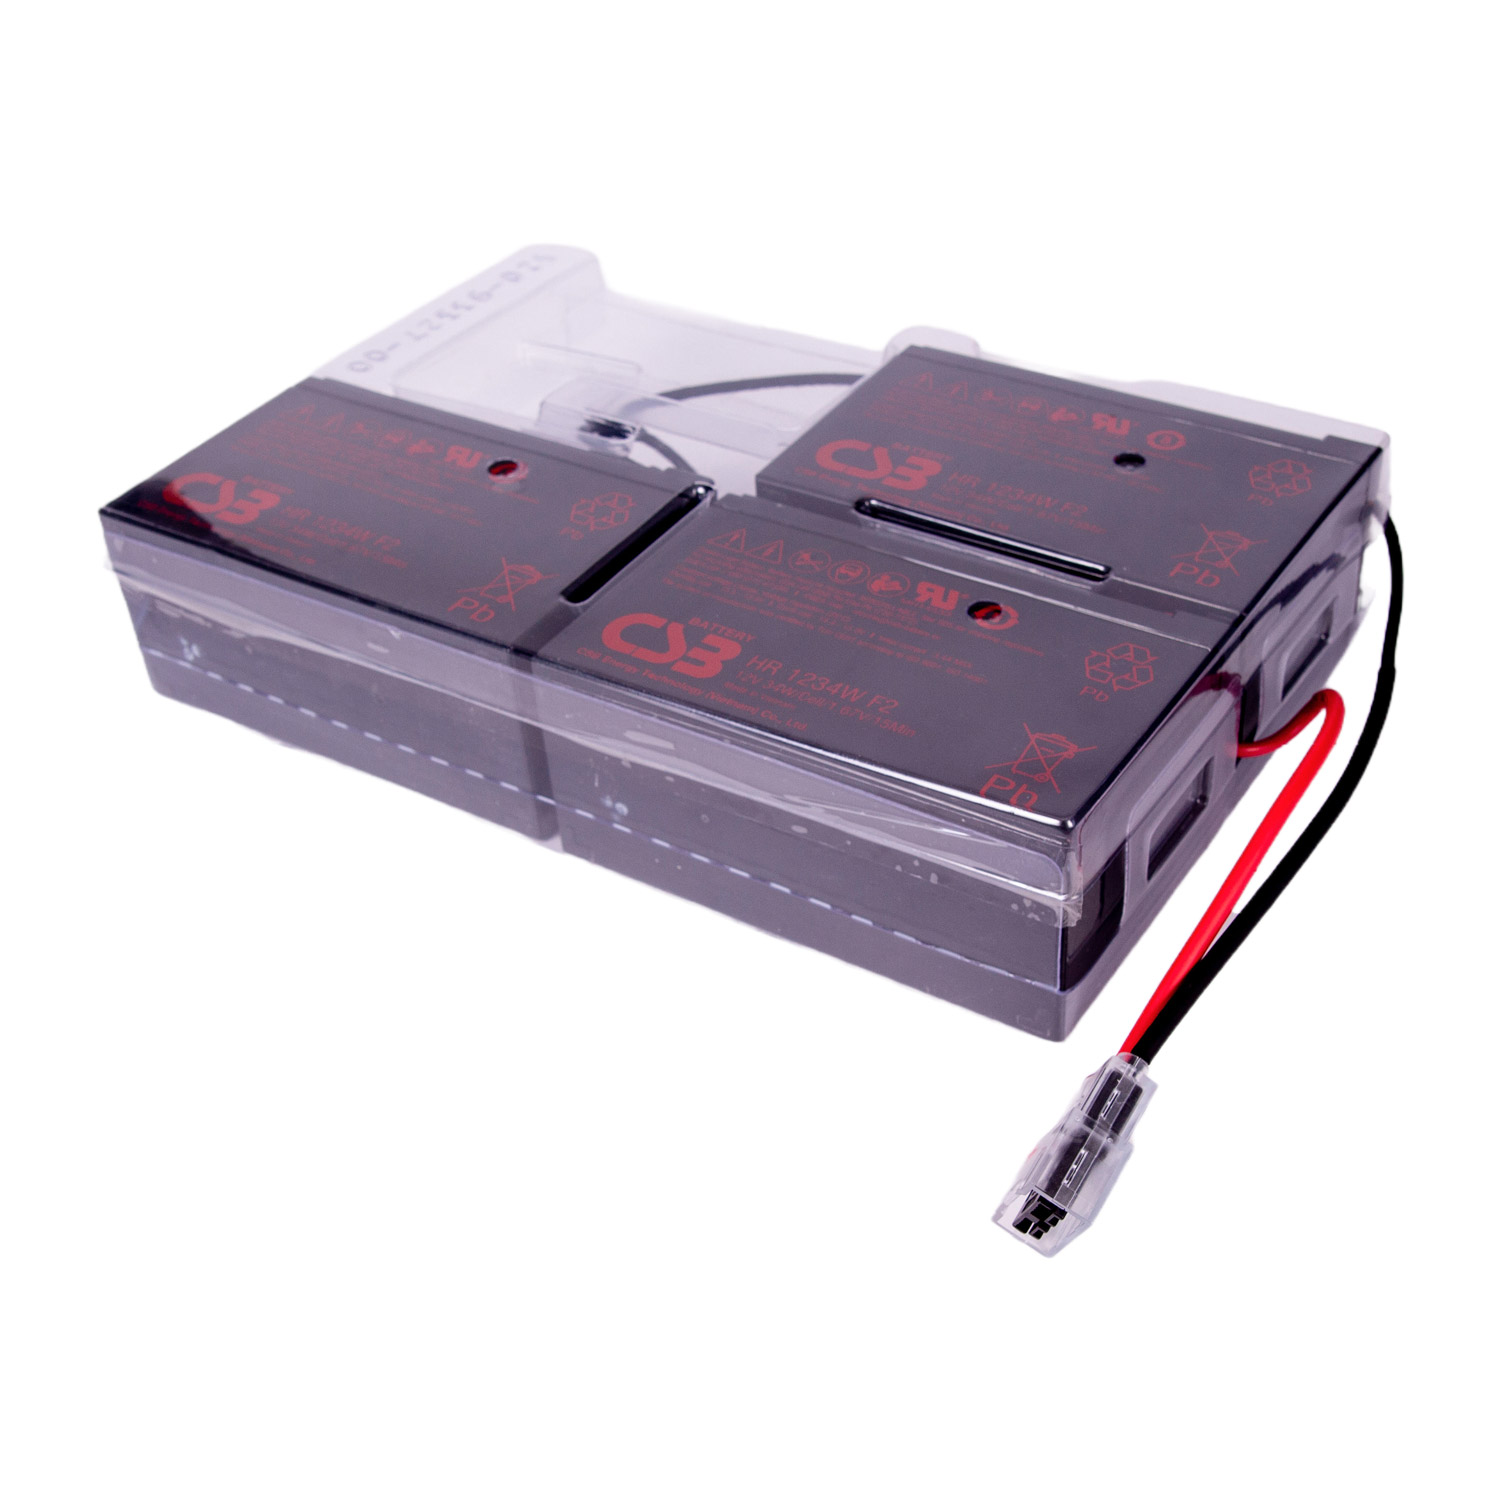 Uniti Power URBK1 Replacement Battery Kit #1 with 1 Year Warranty